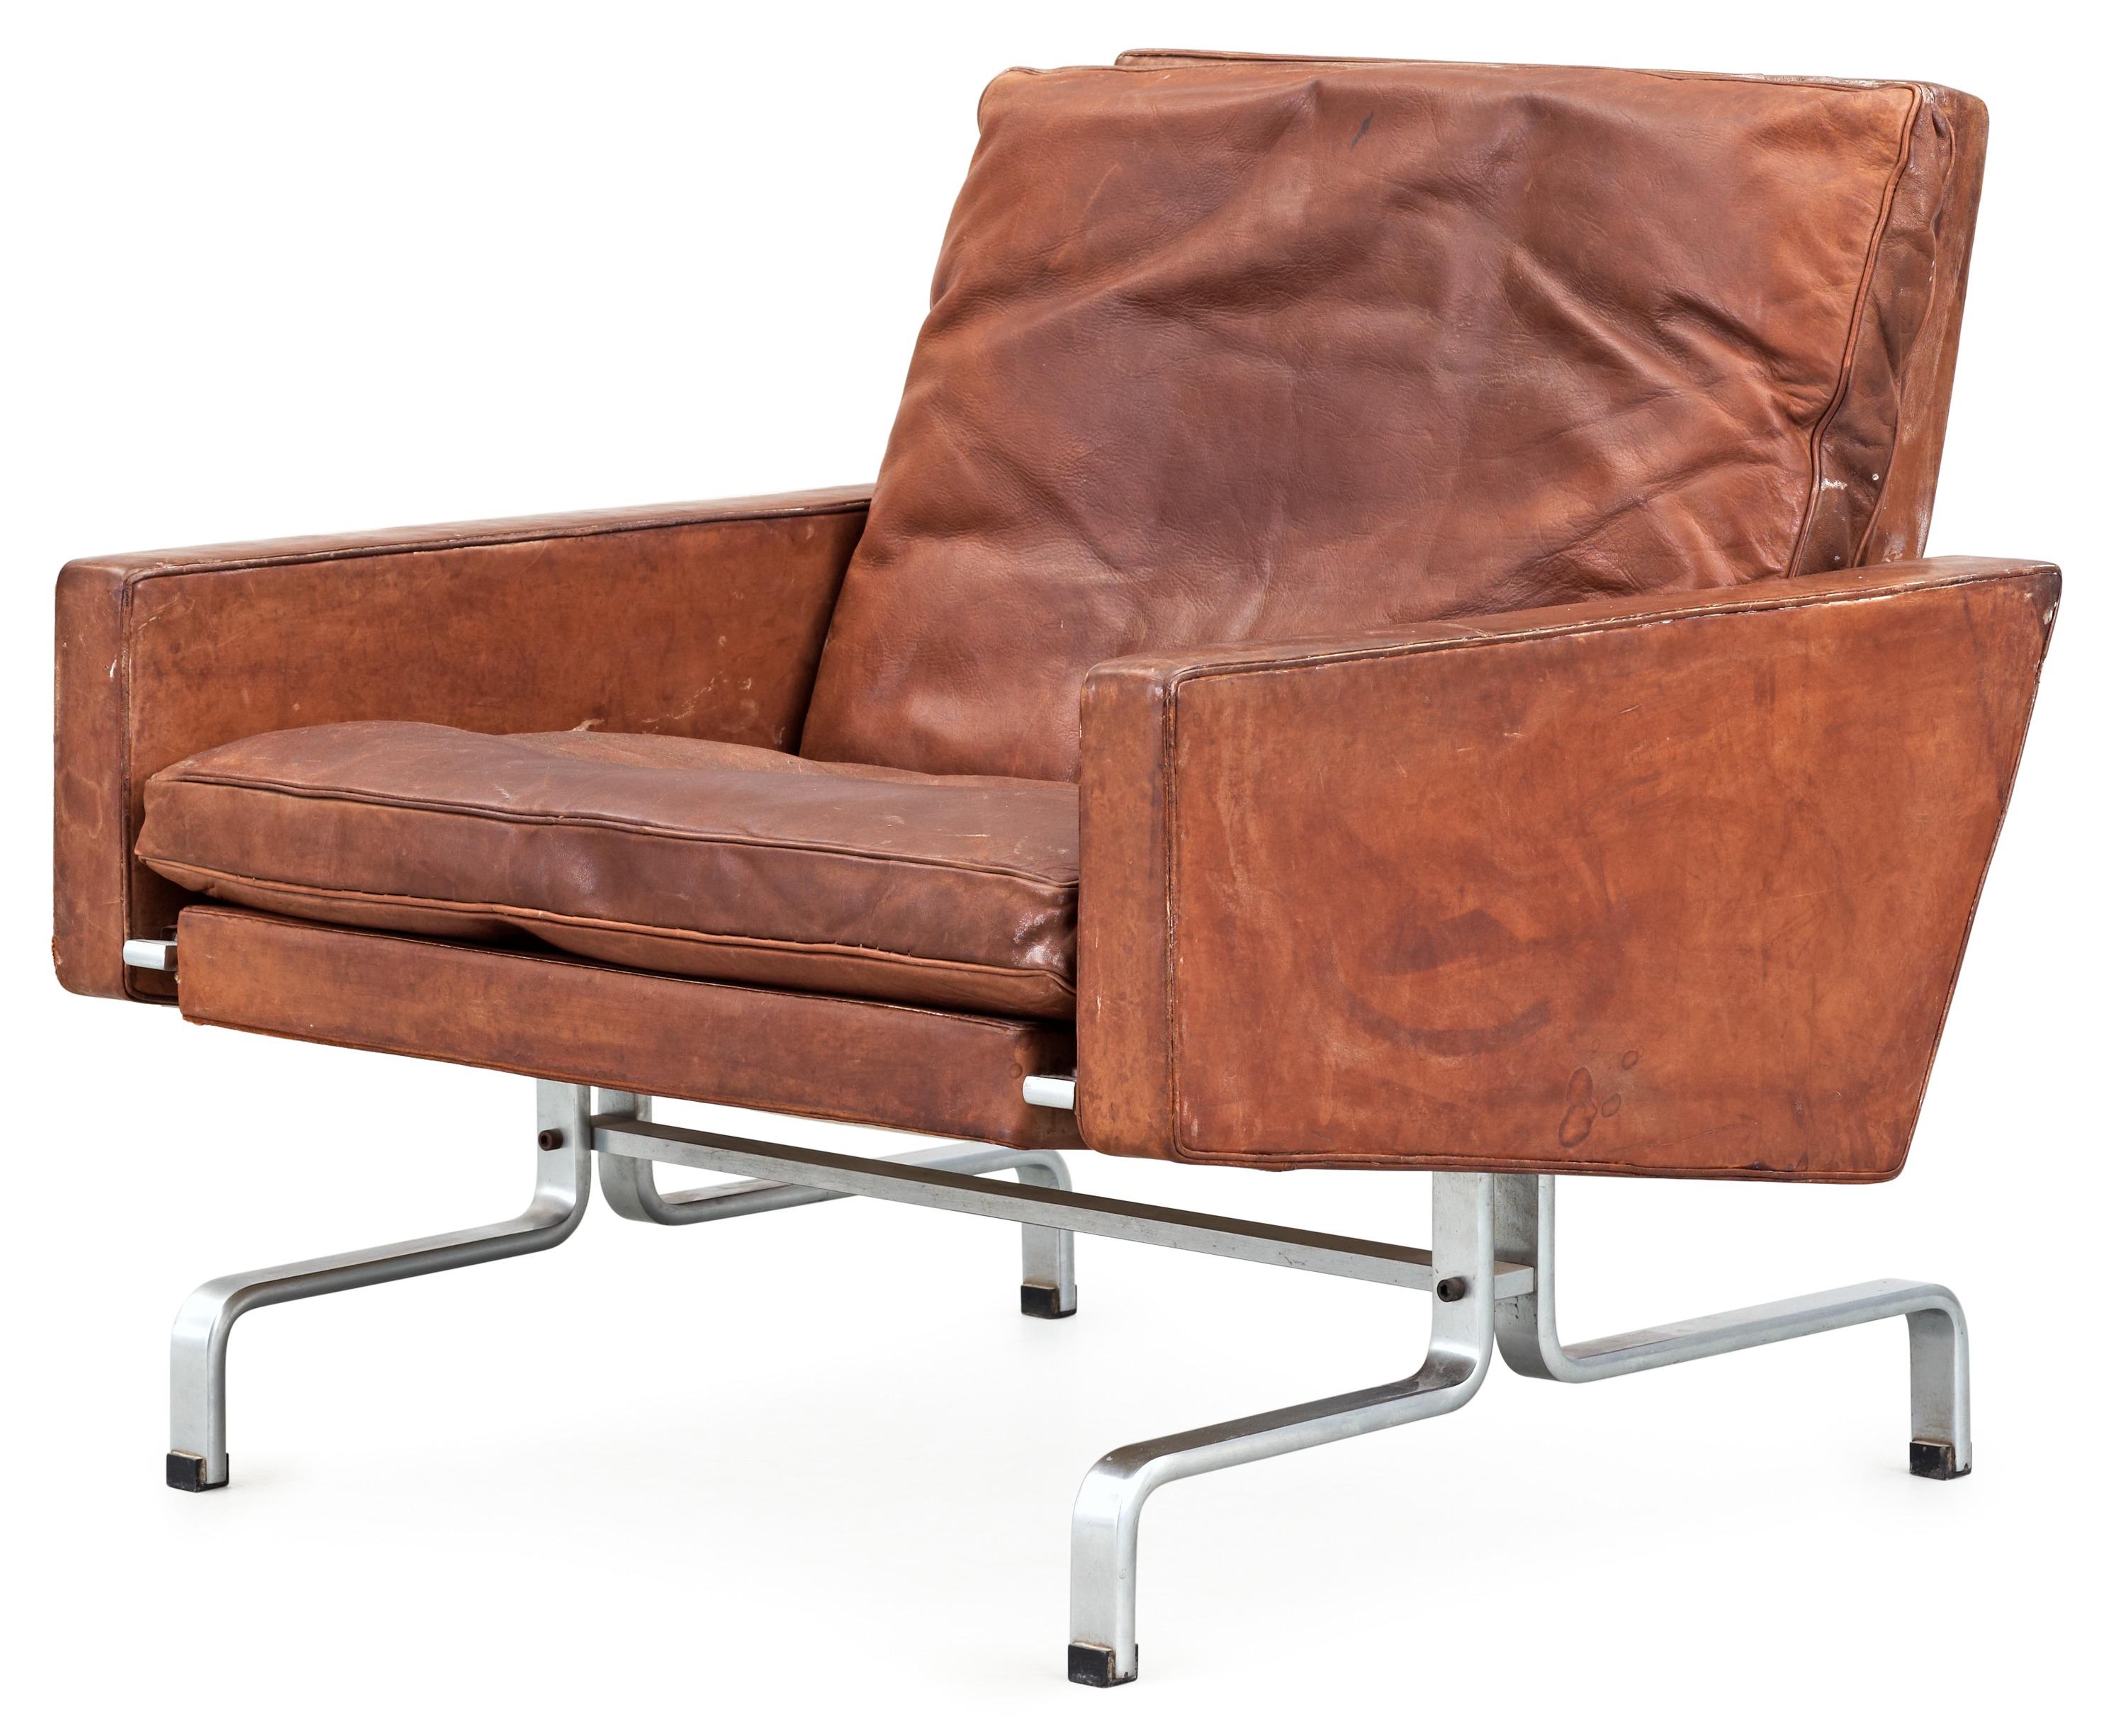 Poul Kjaerholm pair of PK-31/1 Lounge Chairs in Cognac Leather, design from 1958.